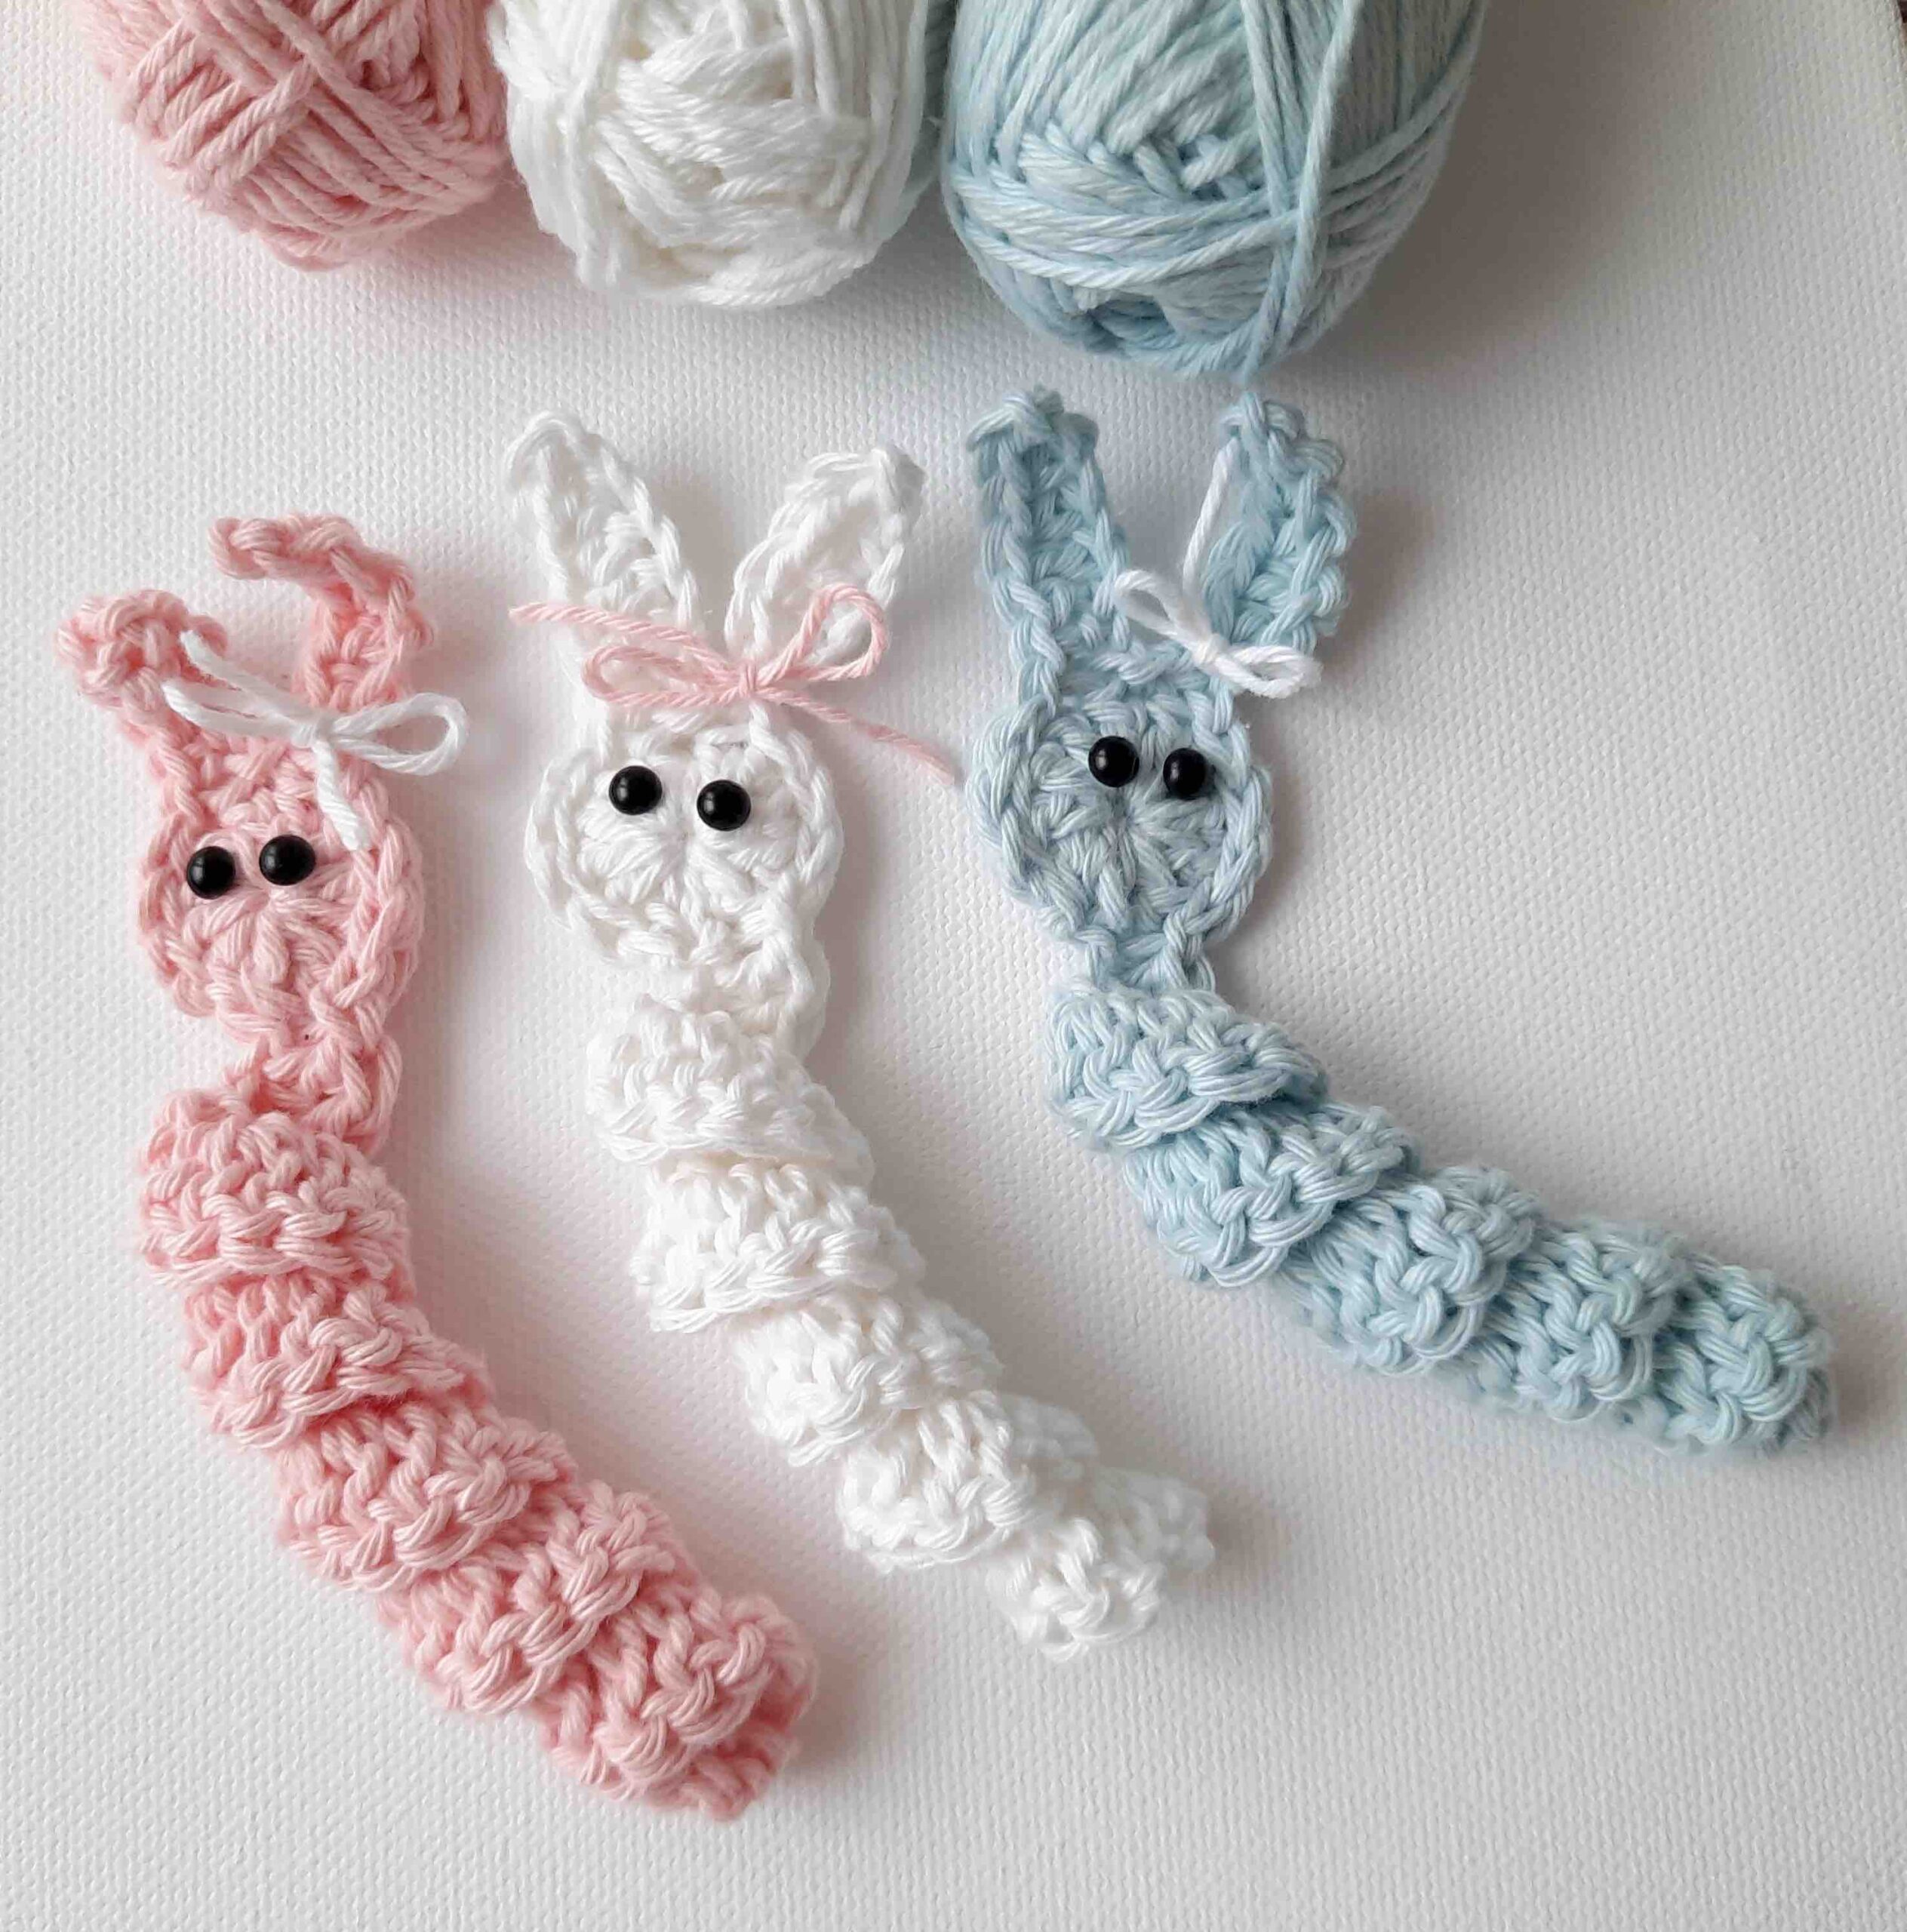 Bunny Worry Worms crochet pattern